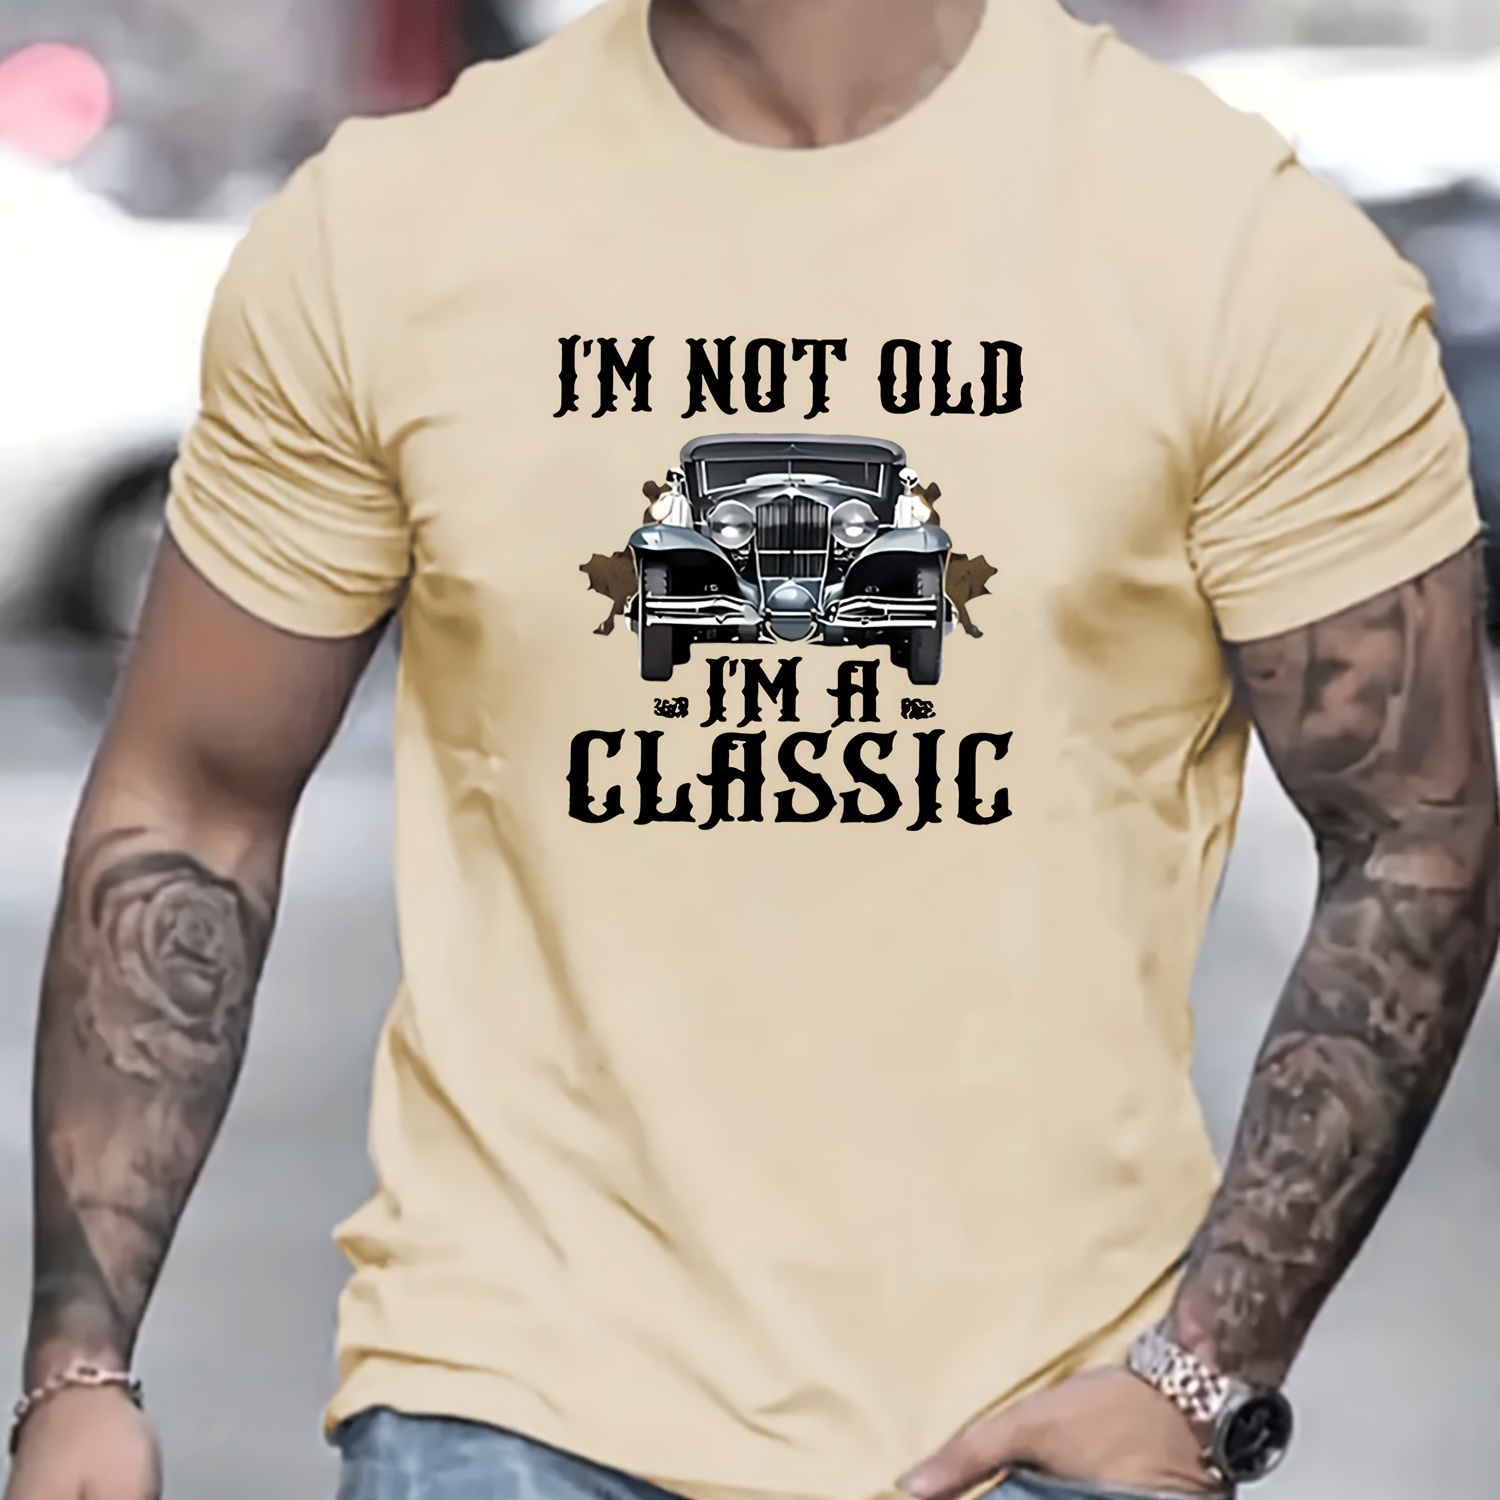 

Funny 'i'm A Classic' Print T Shirt, Tees For Men, Casual Short Sleeve Tshirt For Summer Spring Fall, Tops As Gifts